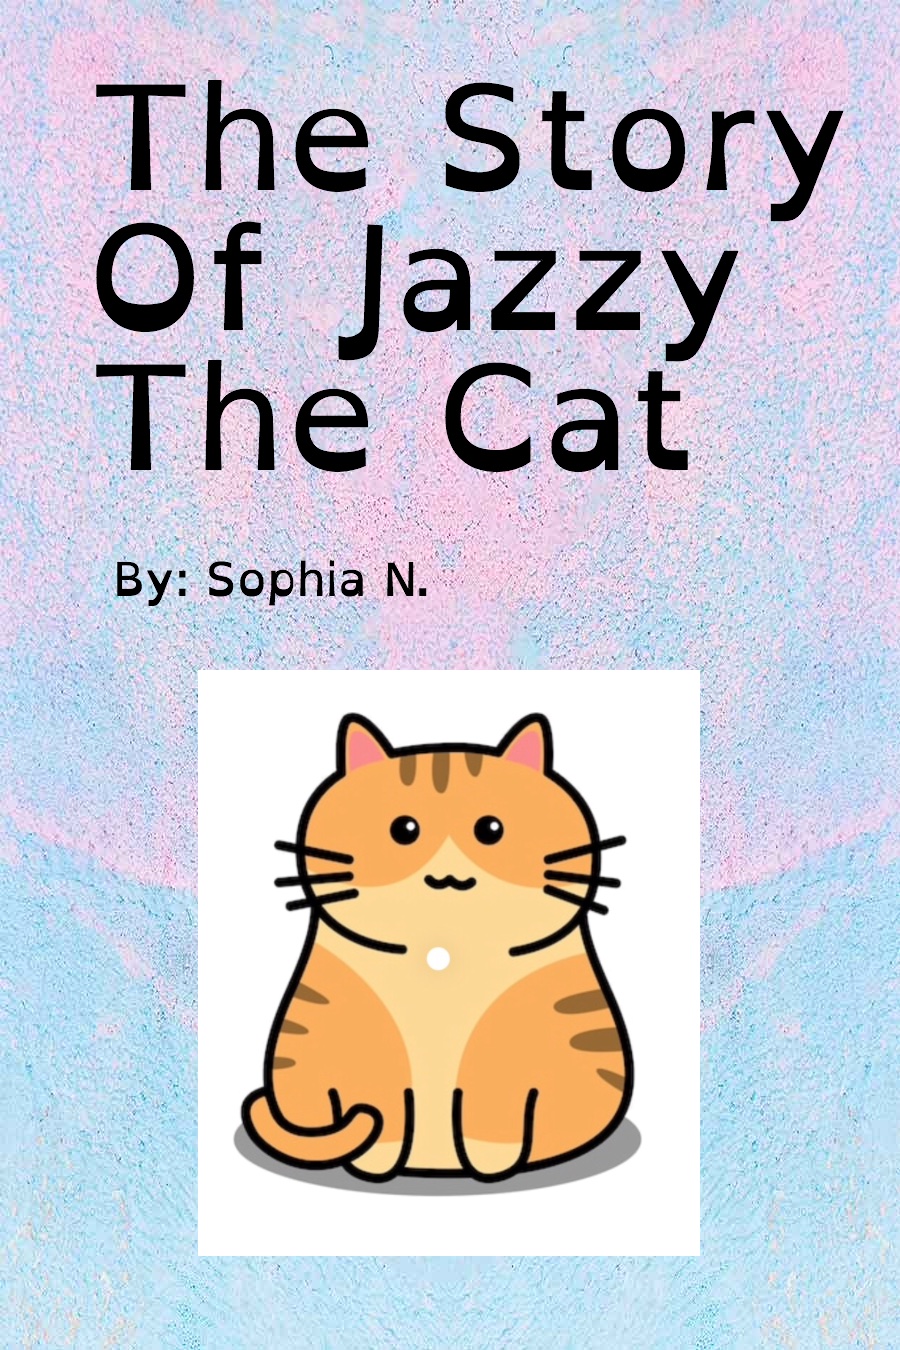 The Story of Jazzy Cat by Sophia N